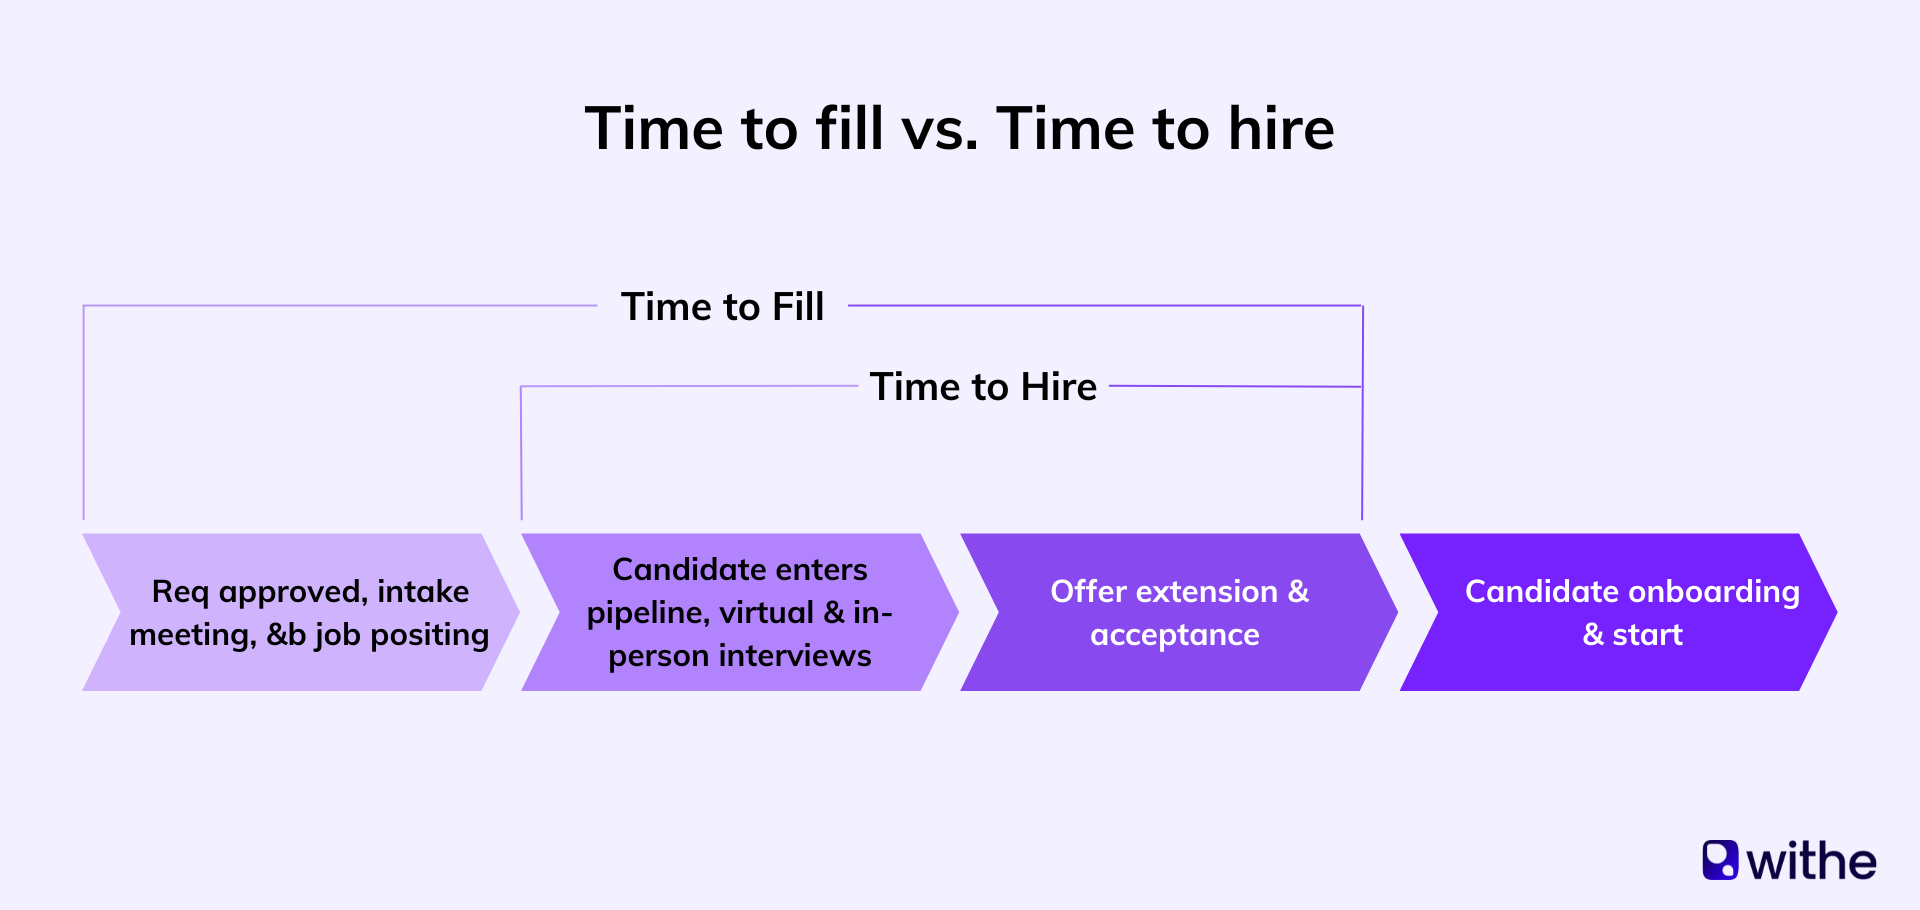 Time to fill vs. Time to hire